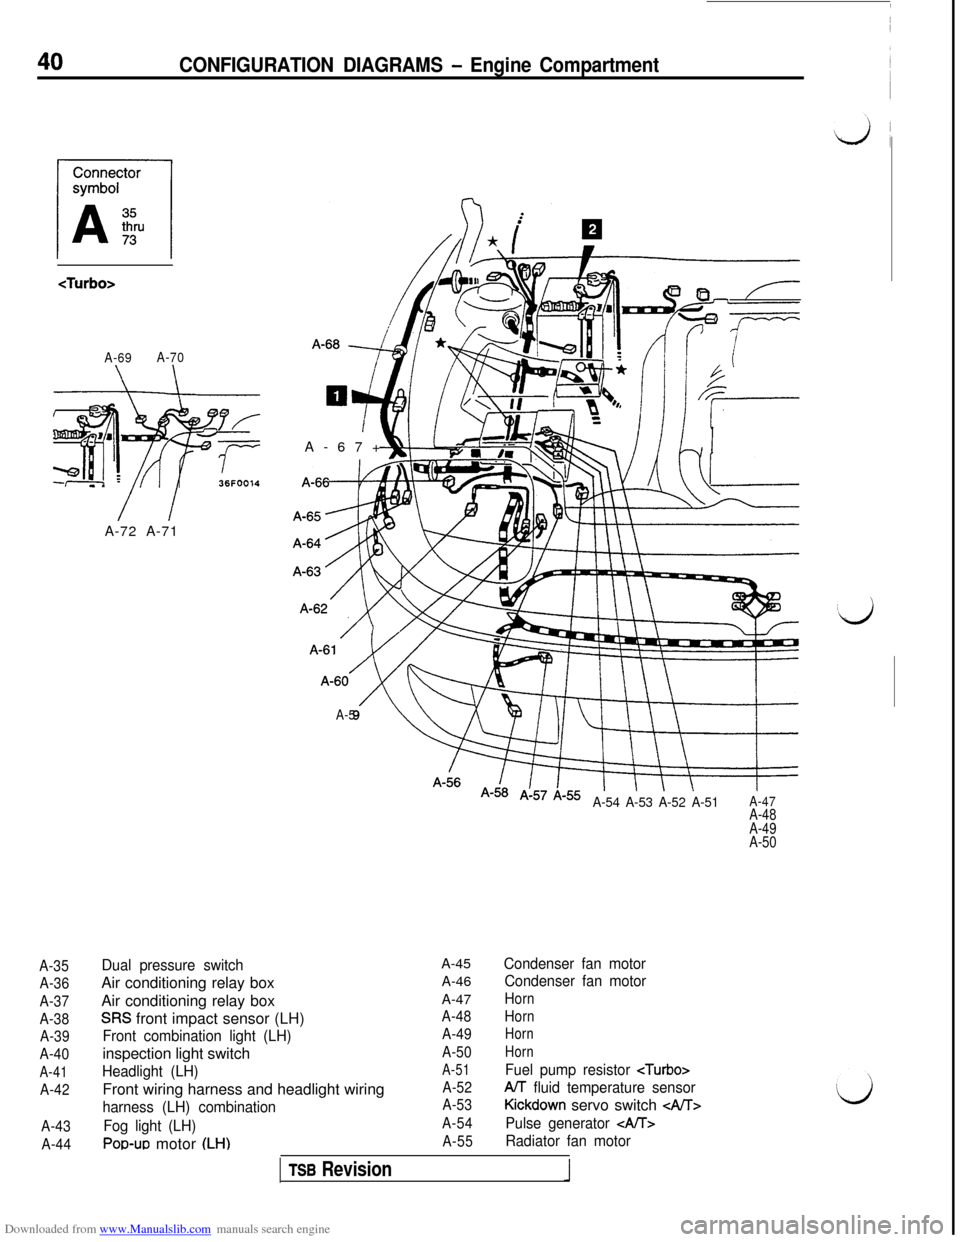 MITSUBISHI 3000GT 1994 2.G Service Manual Downloaded from www.Manualslib.com manuals search engine CONFIGURATION DIAGRAMS - Engine Compartment
<Turbo>
A-69A-70
\ \
36FOO14
A-35
A-36
A-37
A-38
A-39
A-40
A-41
A-42
A-43
A-44A-72 A-71A-67+
A-5
A-